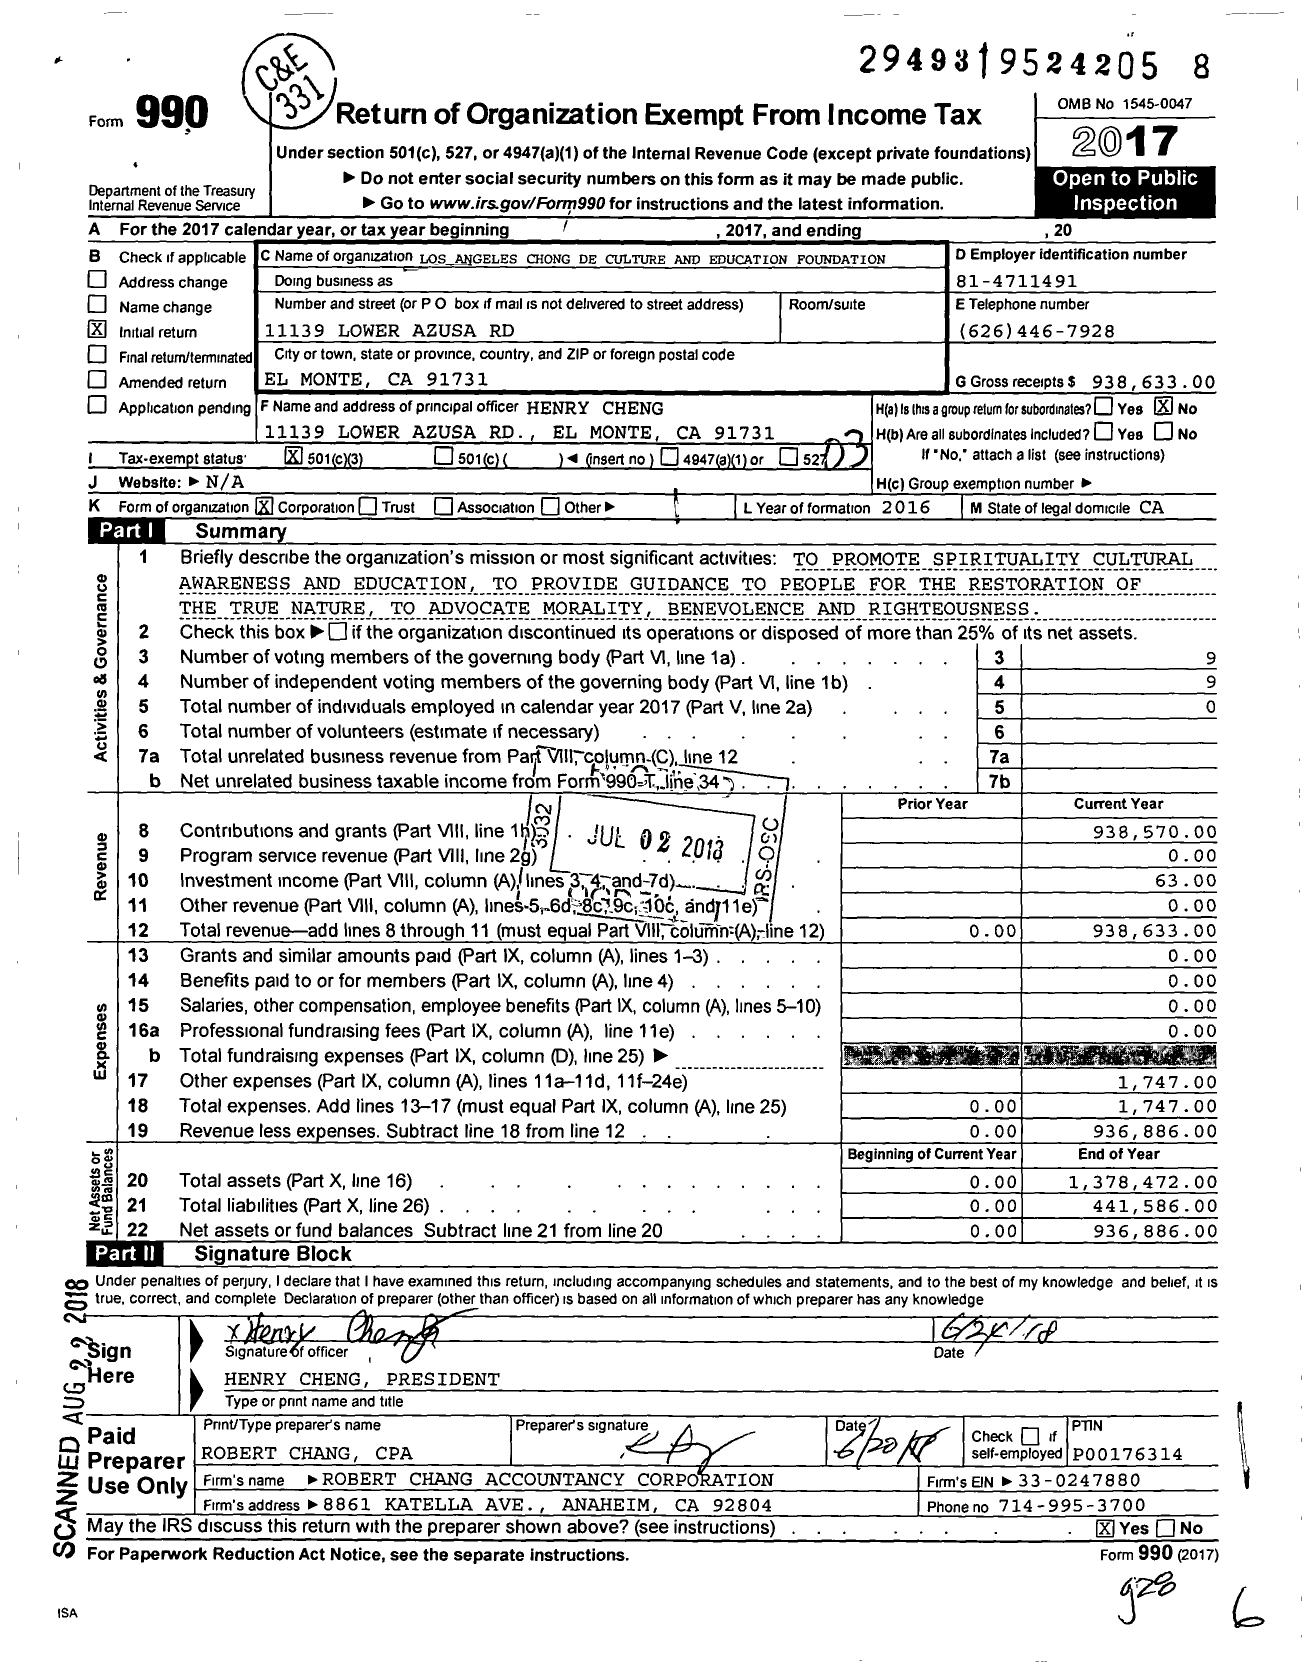 Image of first page of 2017 Form 990 for Los Angeles Chong de Culture and Education Foundation